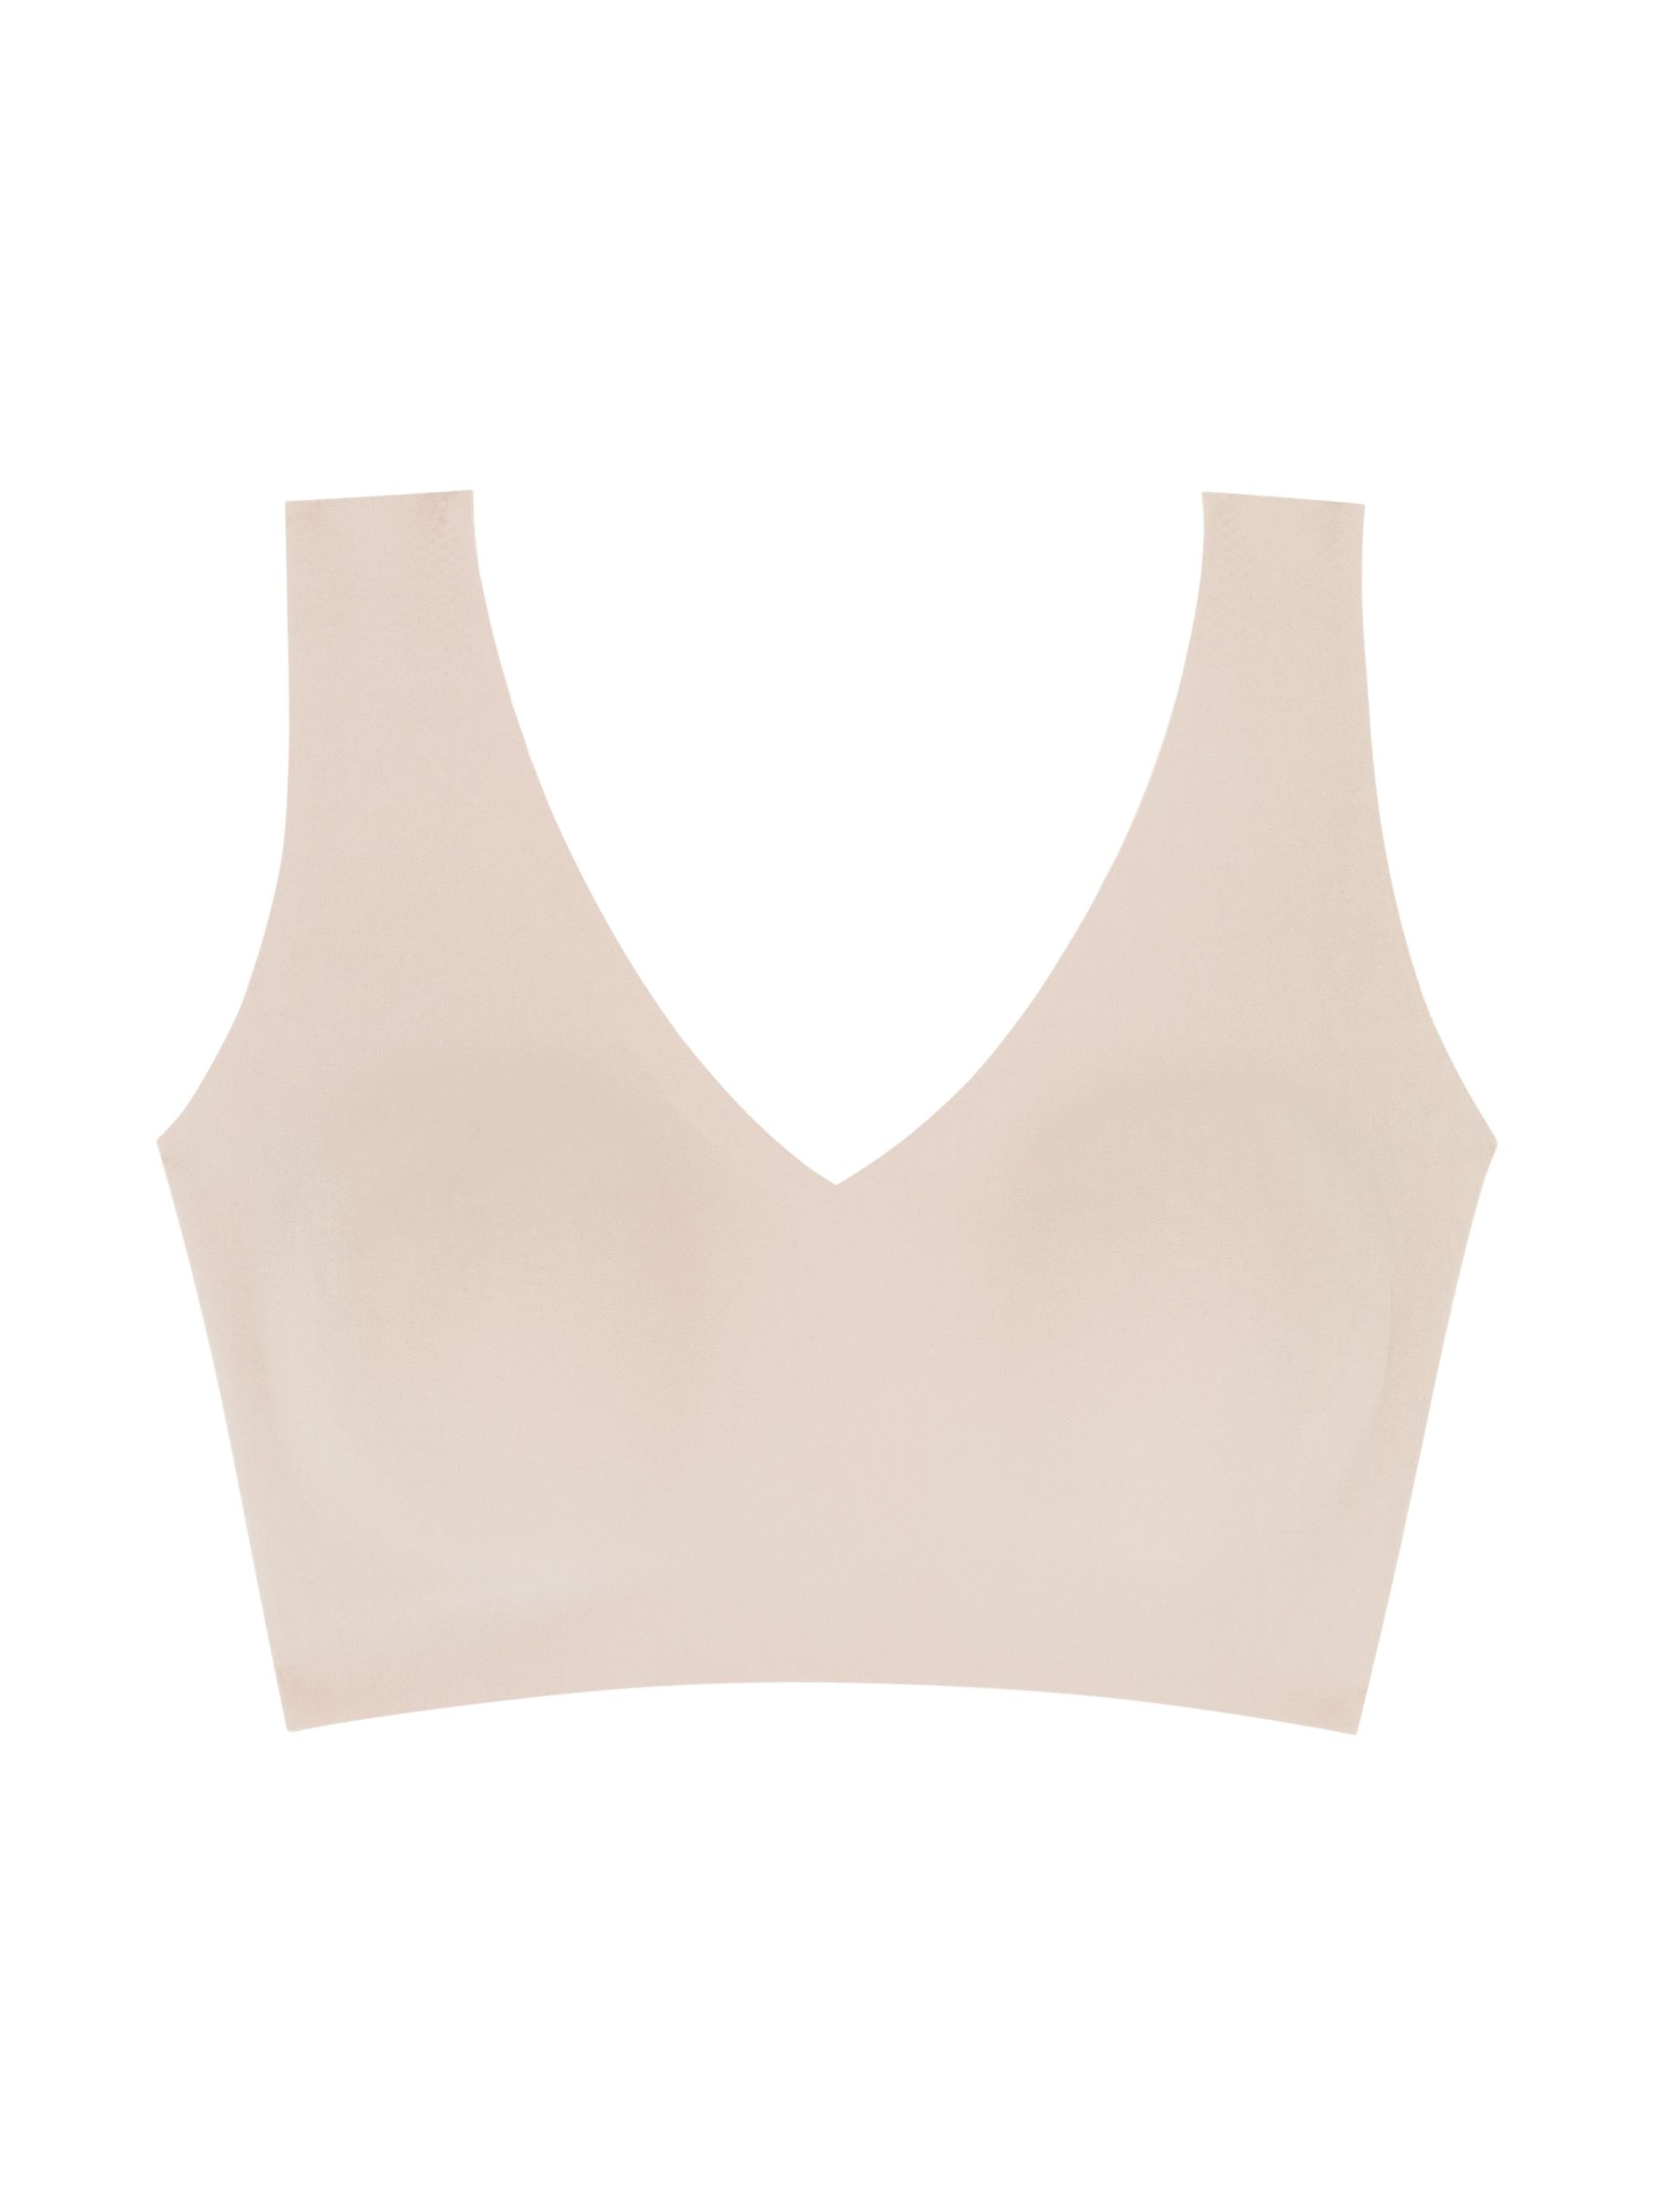 DORINA - Try this pair of eco-friendly bralette made of recycled